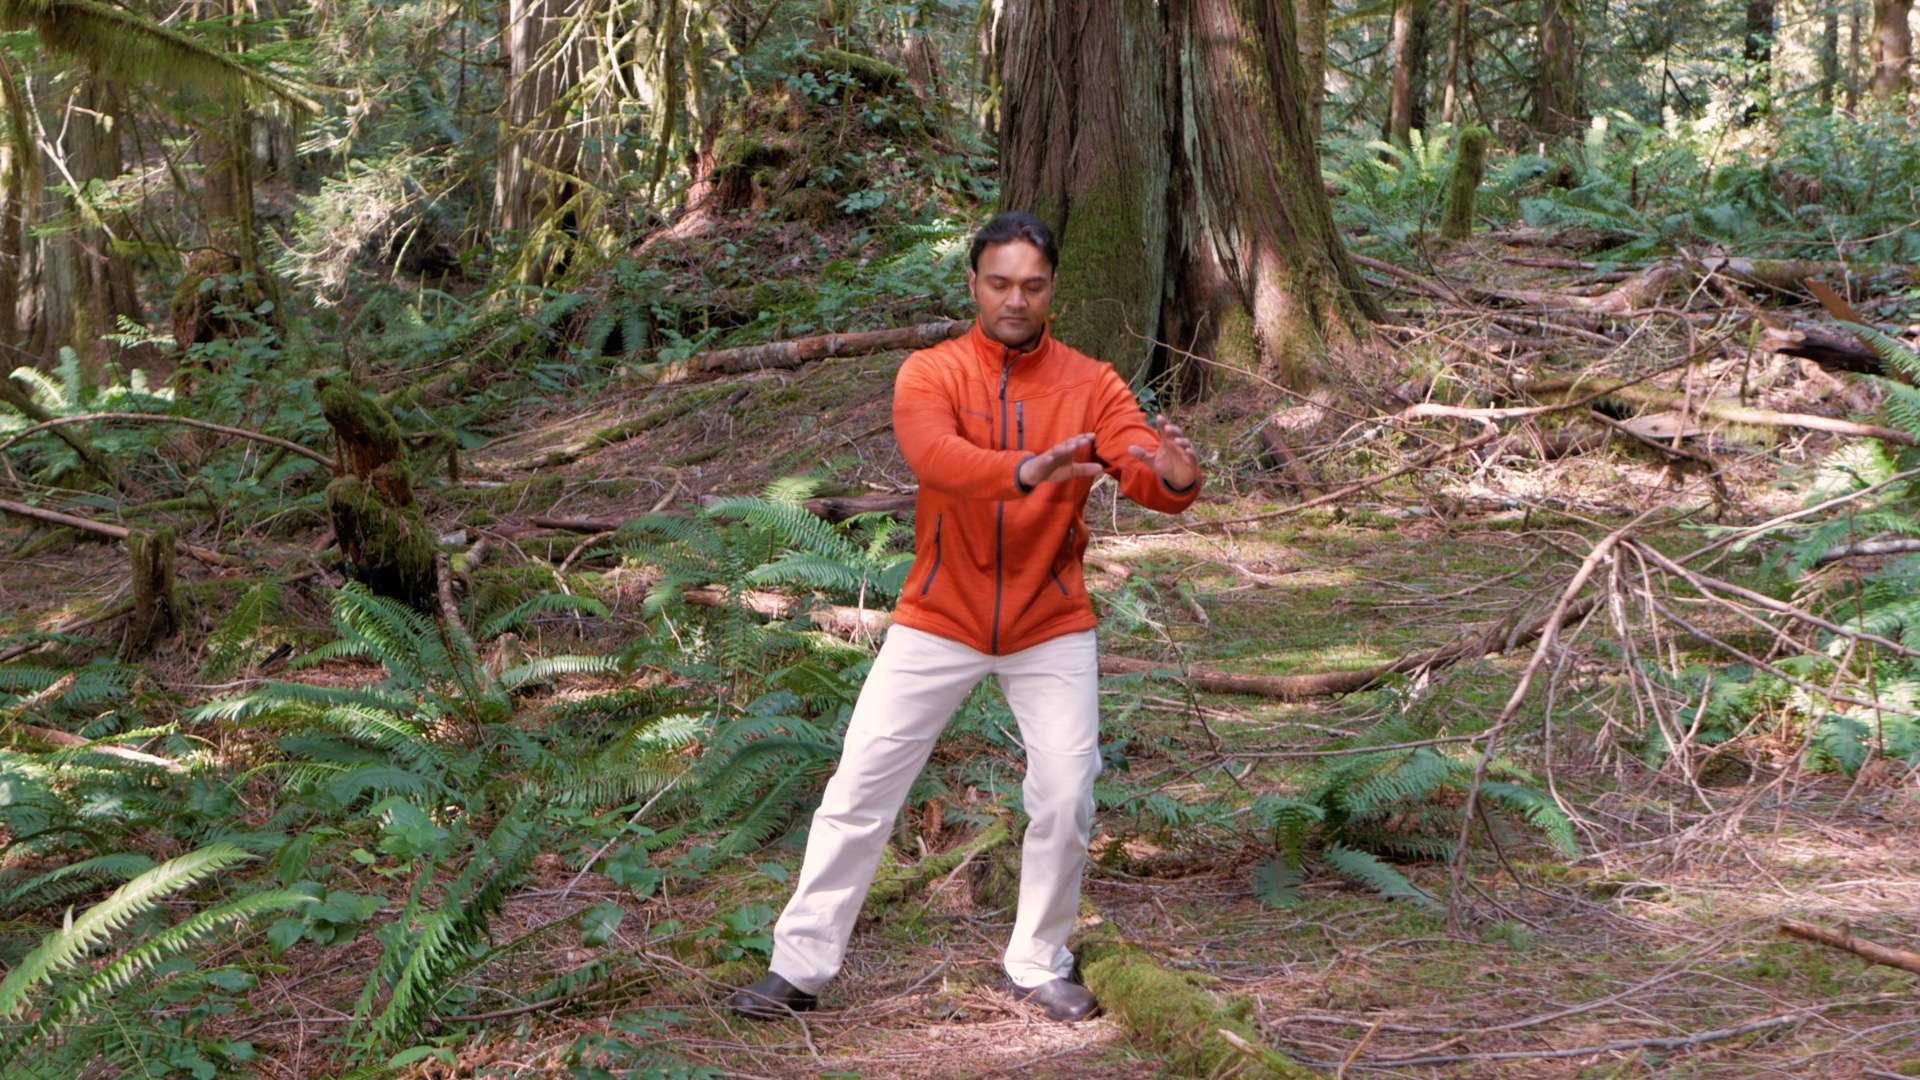 qigong practice demonstration in forest